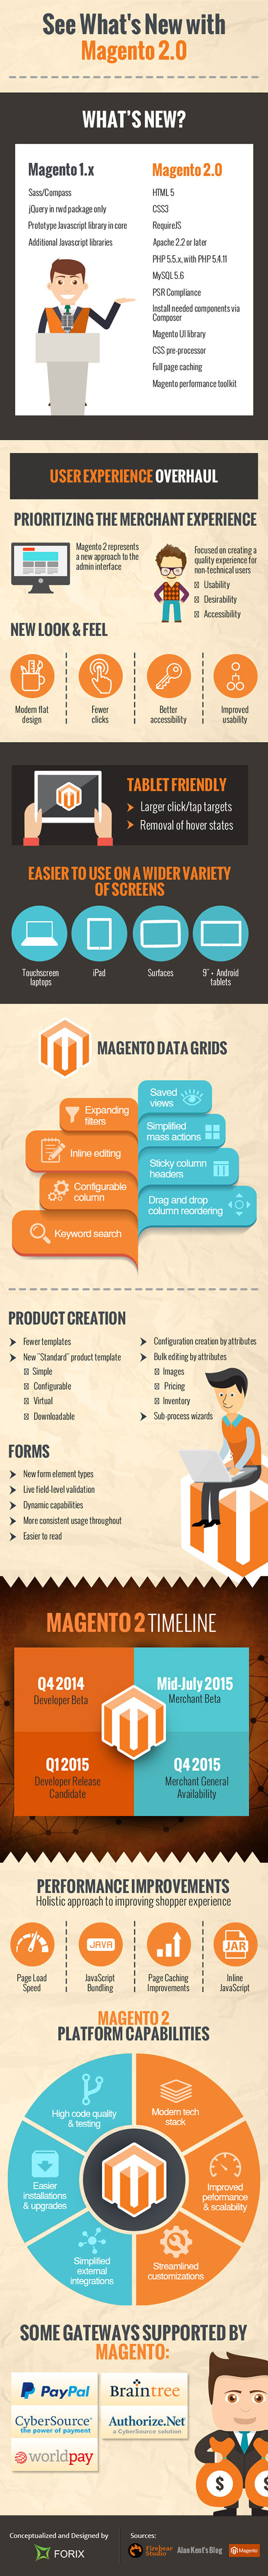 What's New With Magento 2.0 (Infographic)